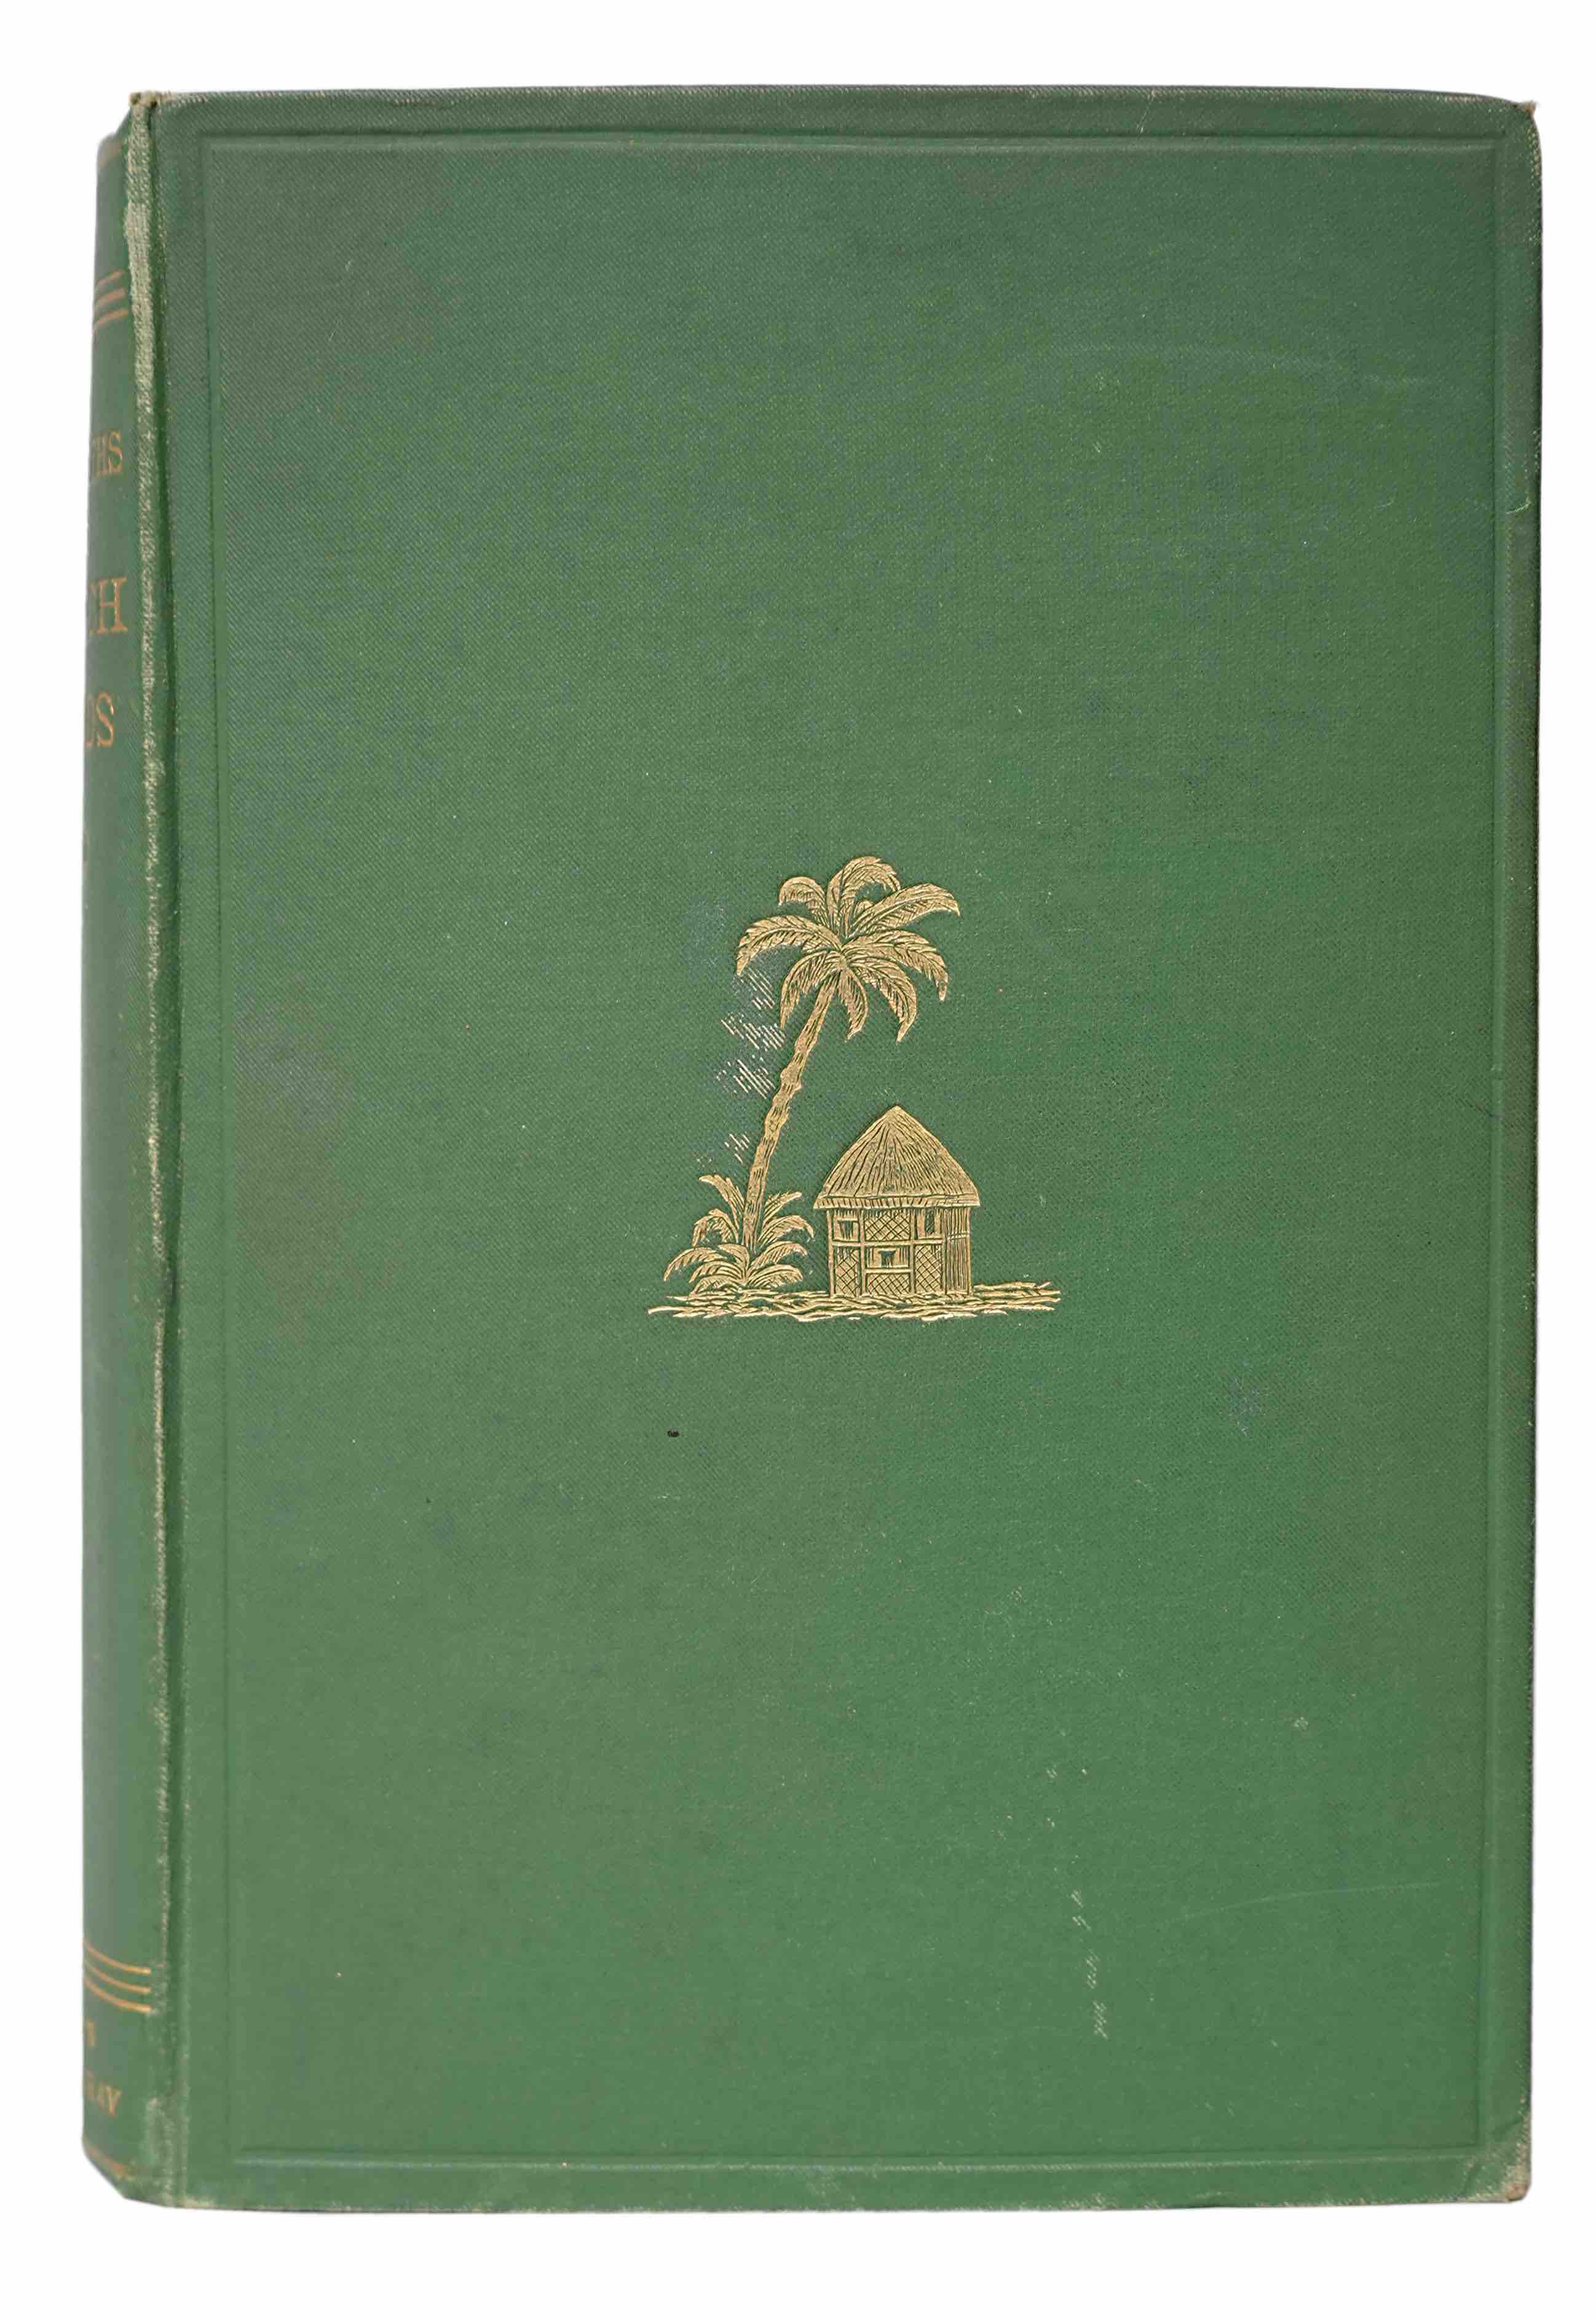 BIRD, ISABELLA LUCY (Mrs. Bishop): - The Hawaiian Archipelago. Six months amongst the palm groves, coral reefs, and volcanoes of the Sandwich Islands. London, John Murray, 1876 (but 1878).